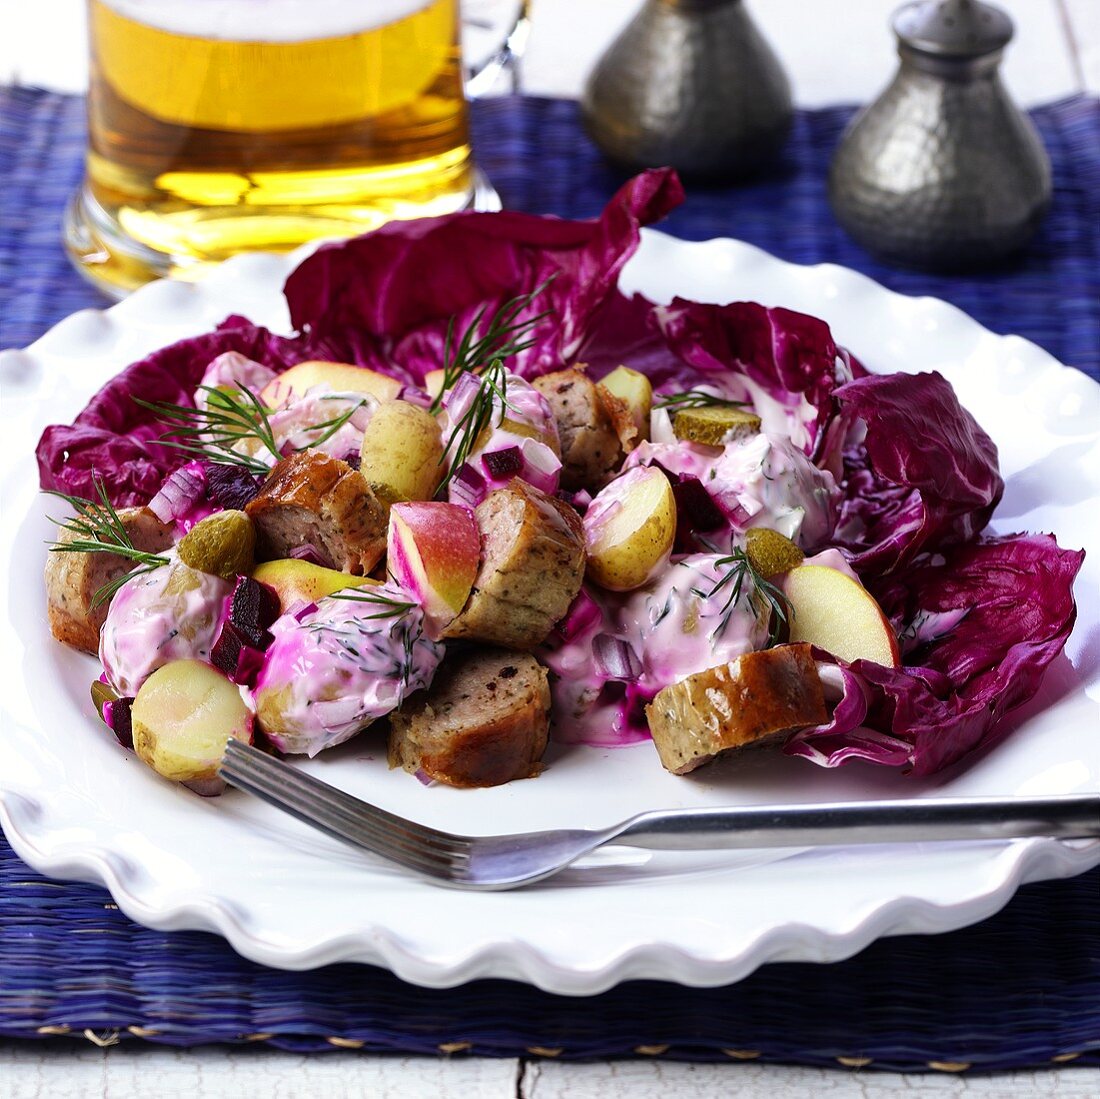 Potato salad with sausages and red cabbage leaves